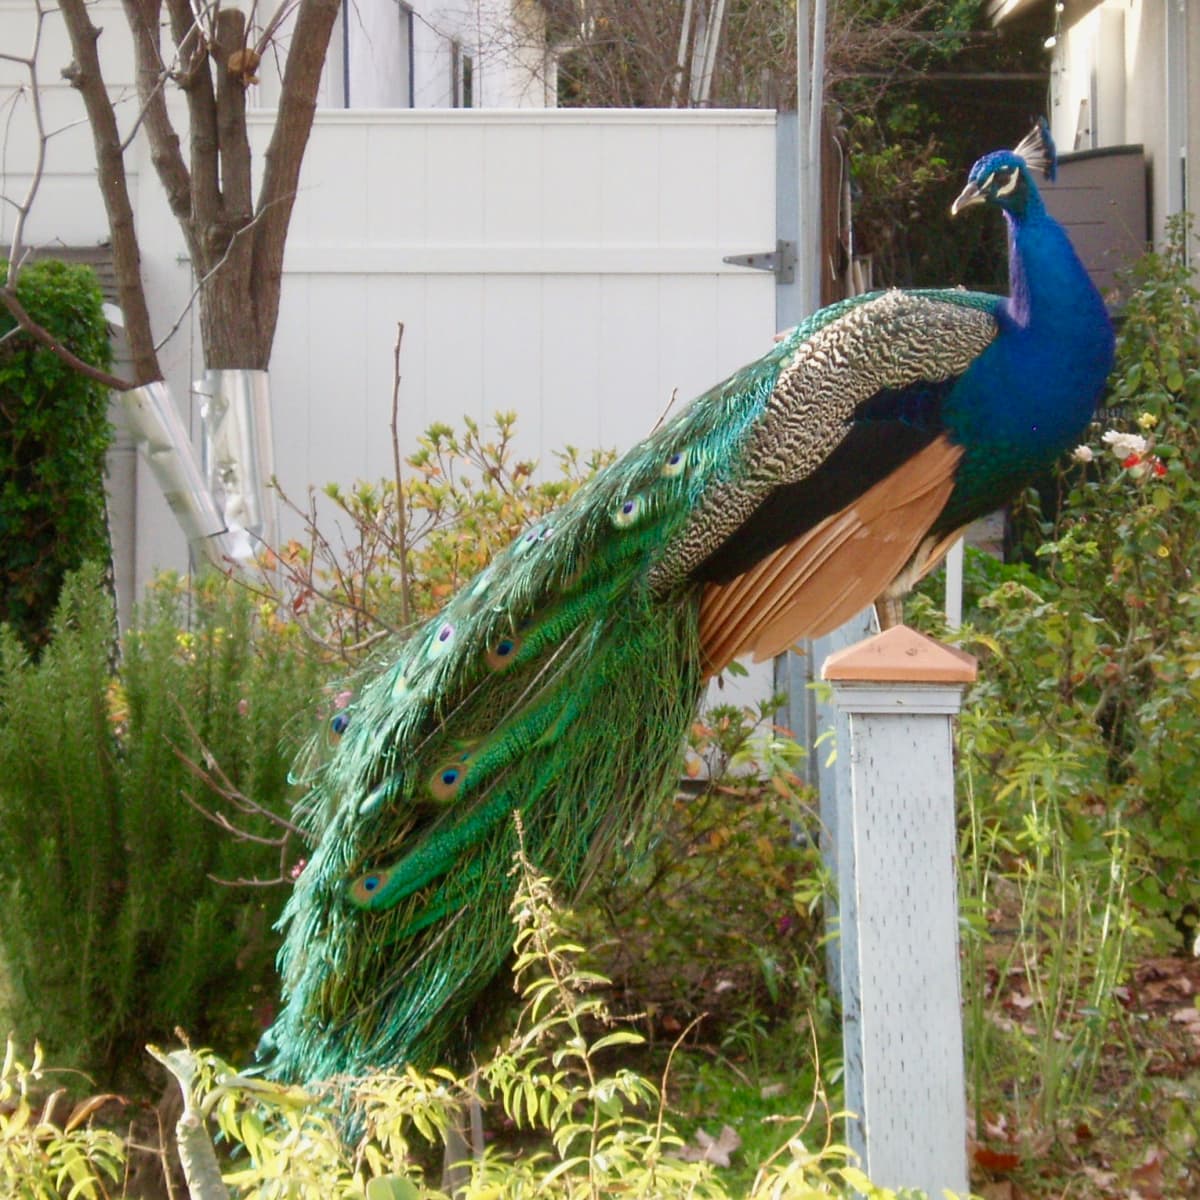 How Feral Peacocks Stay Alive in Urban Neighborhoods - PetHelpful